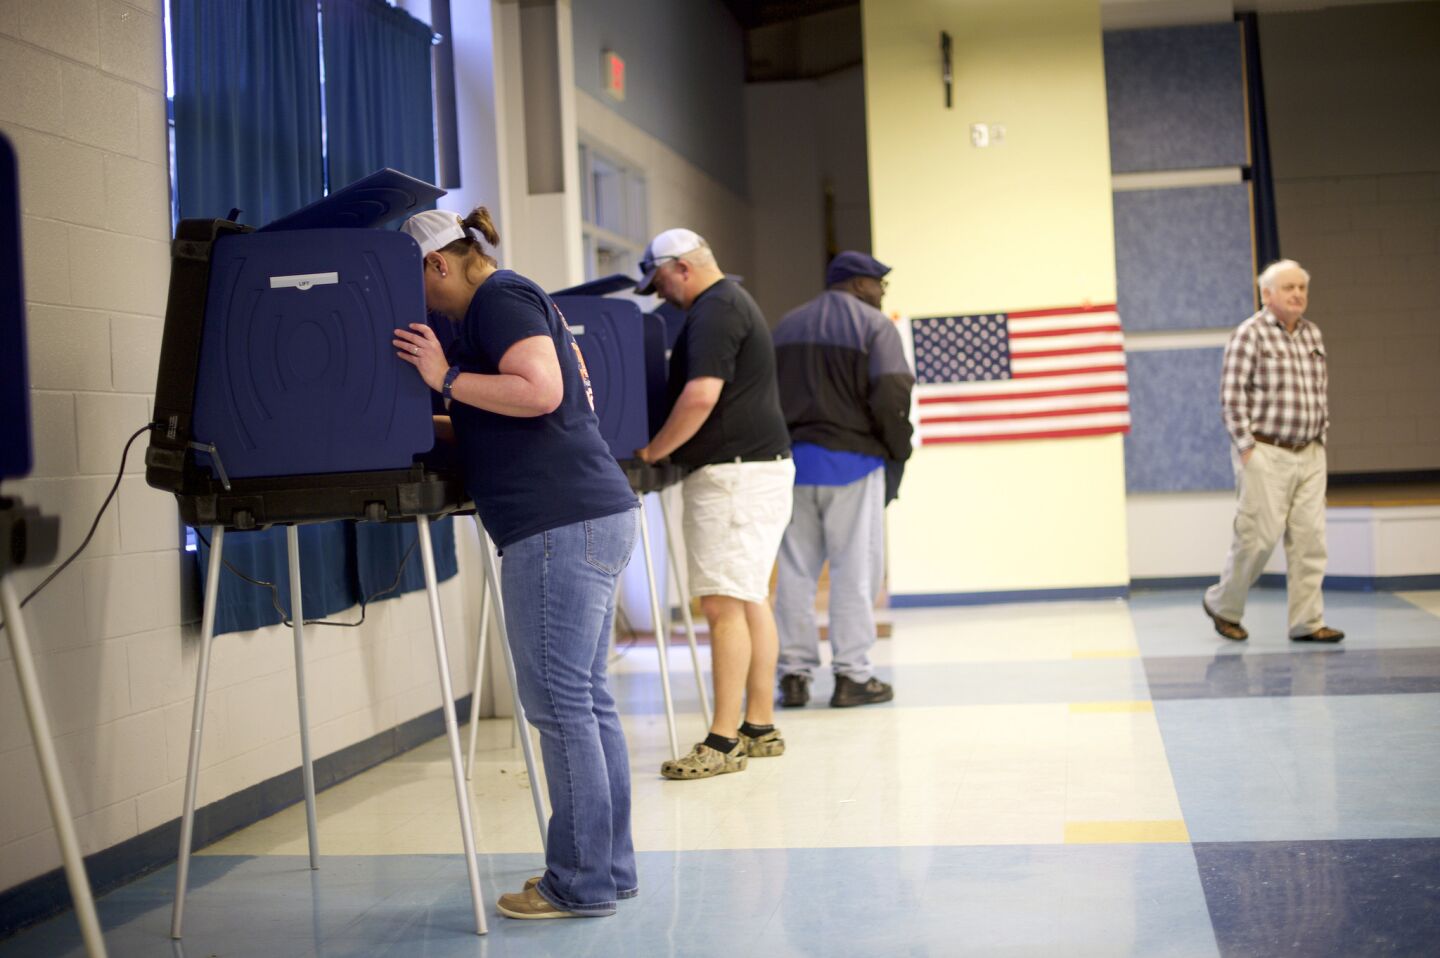 South Carolina voters cast ballots at a middle school in Walterboro in the state's Republican primary.